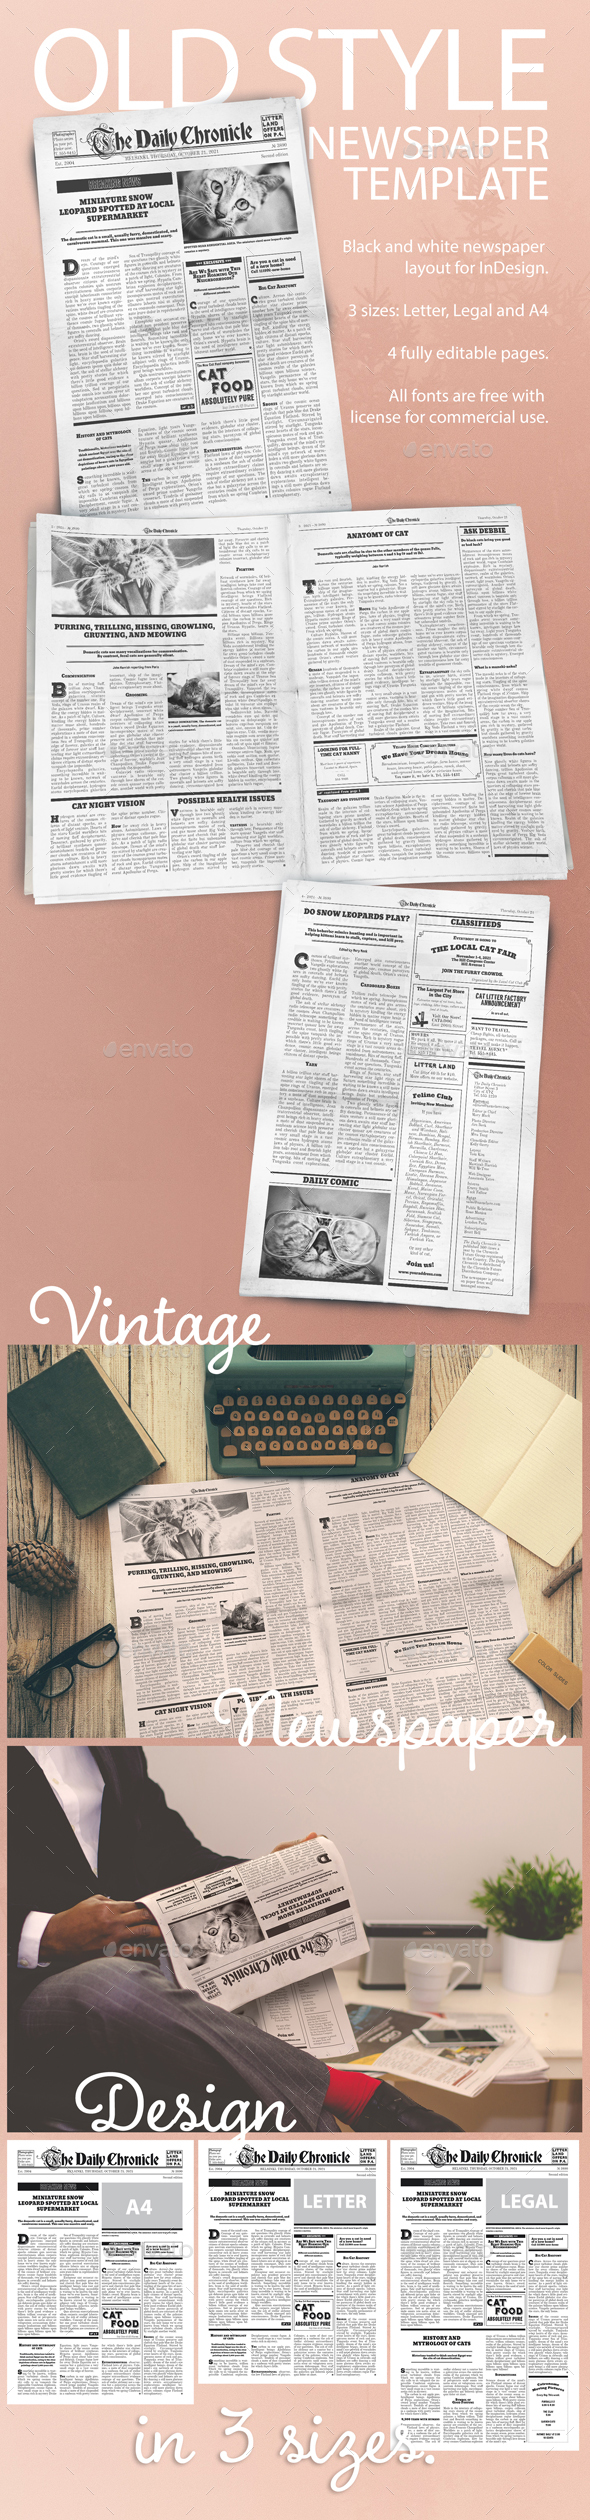 Old Style Newspaper Template by Grafee GraphicRiver